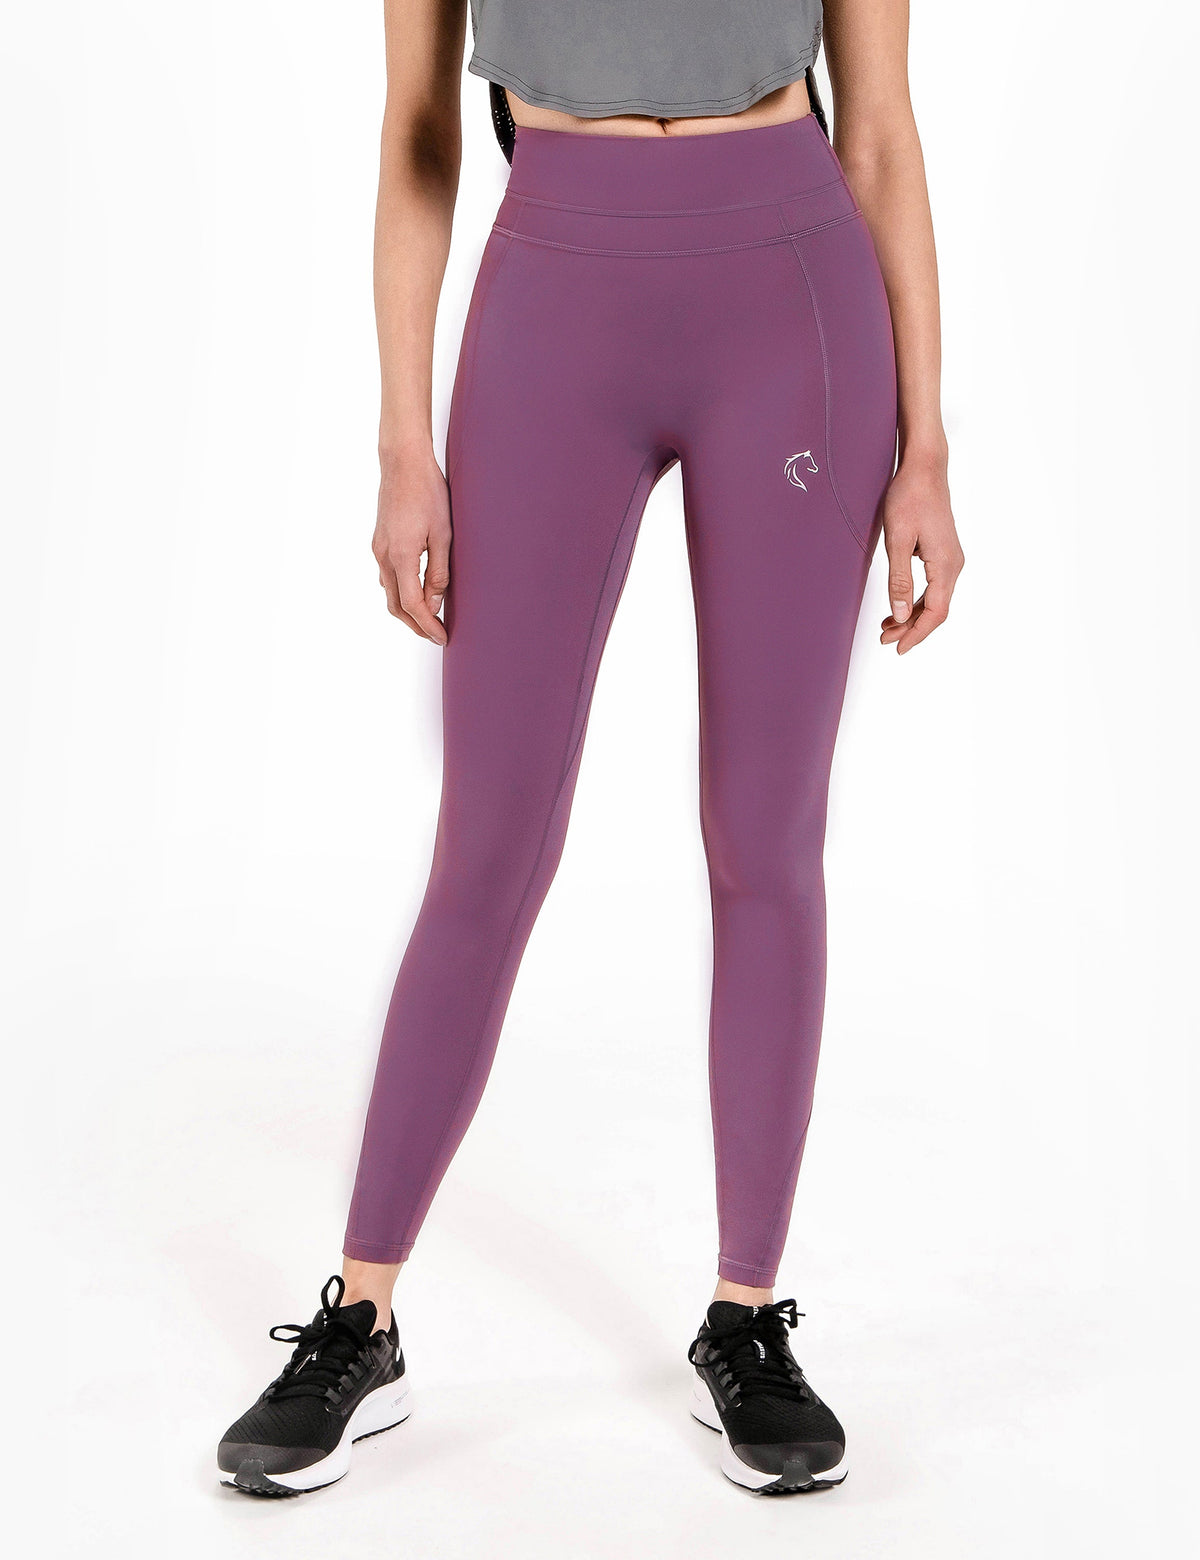 Evolve Pleather Leggings – The Vibe Collective, LLC